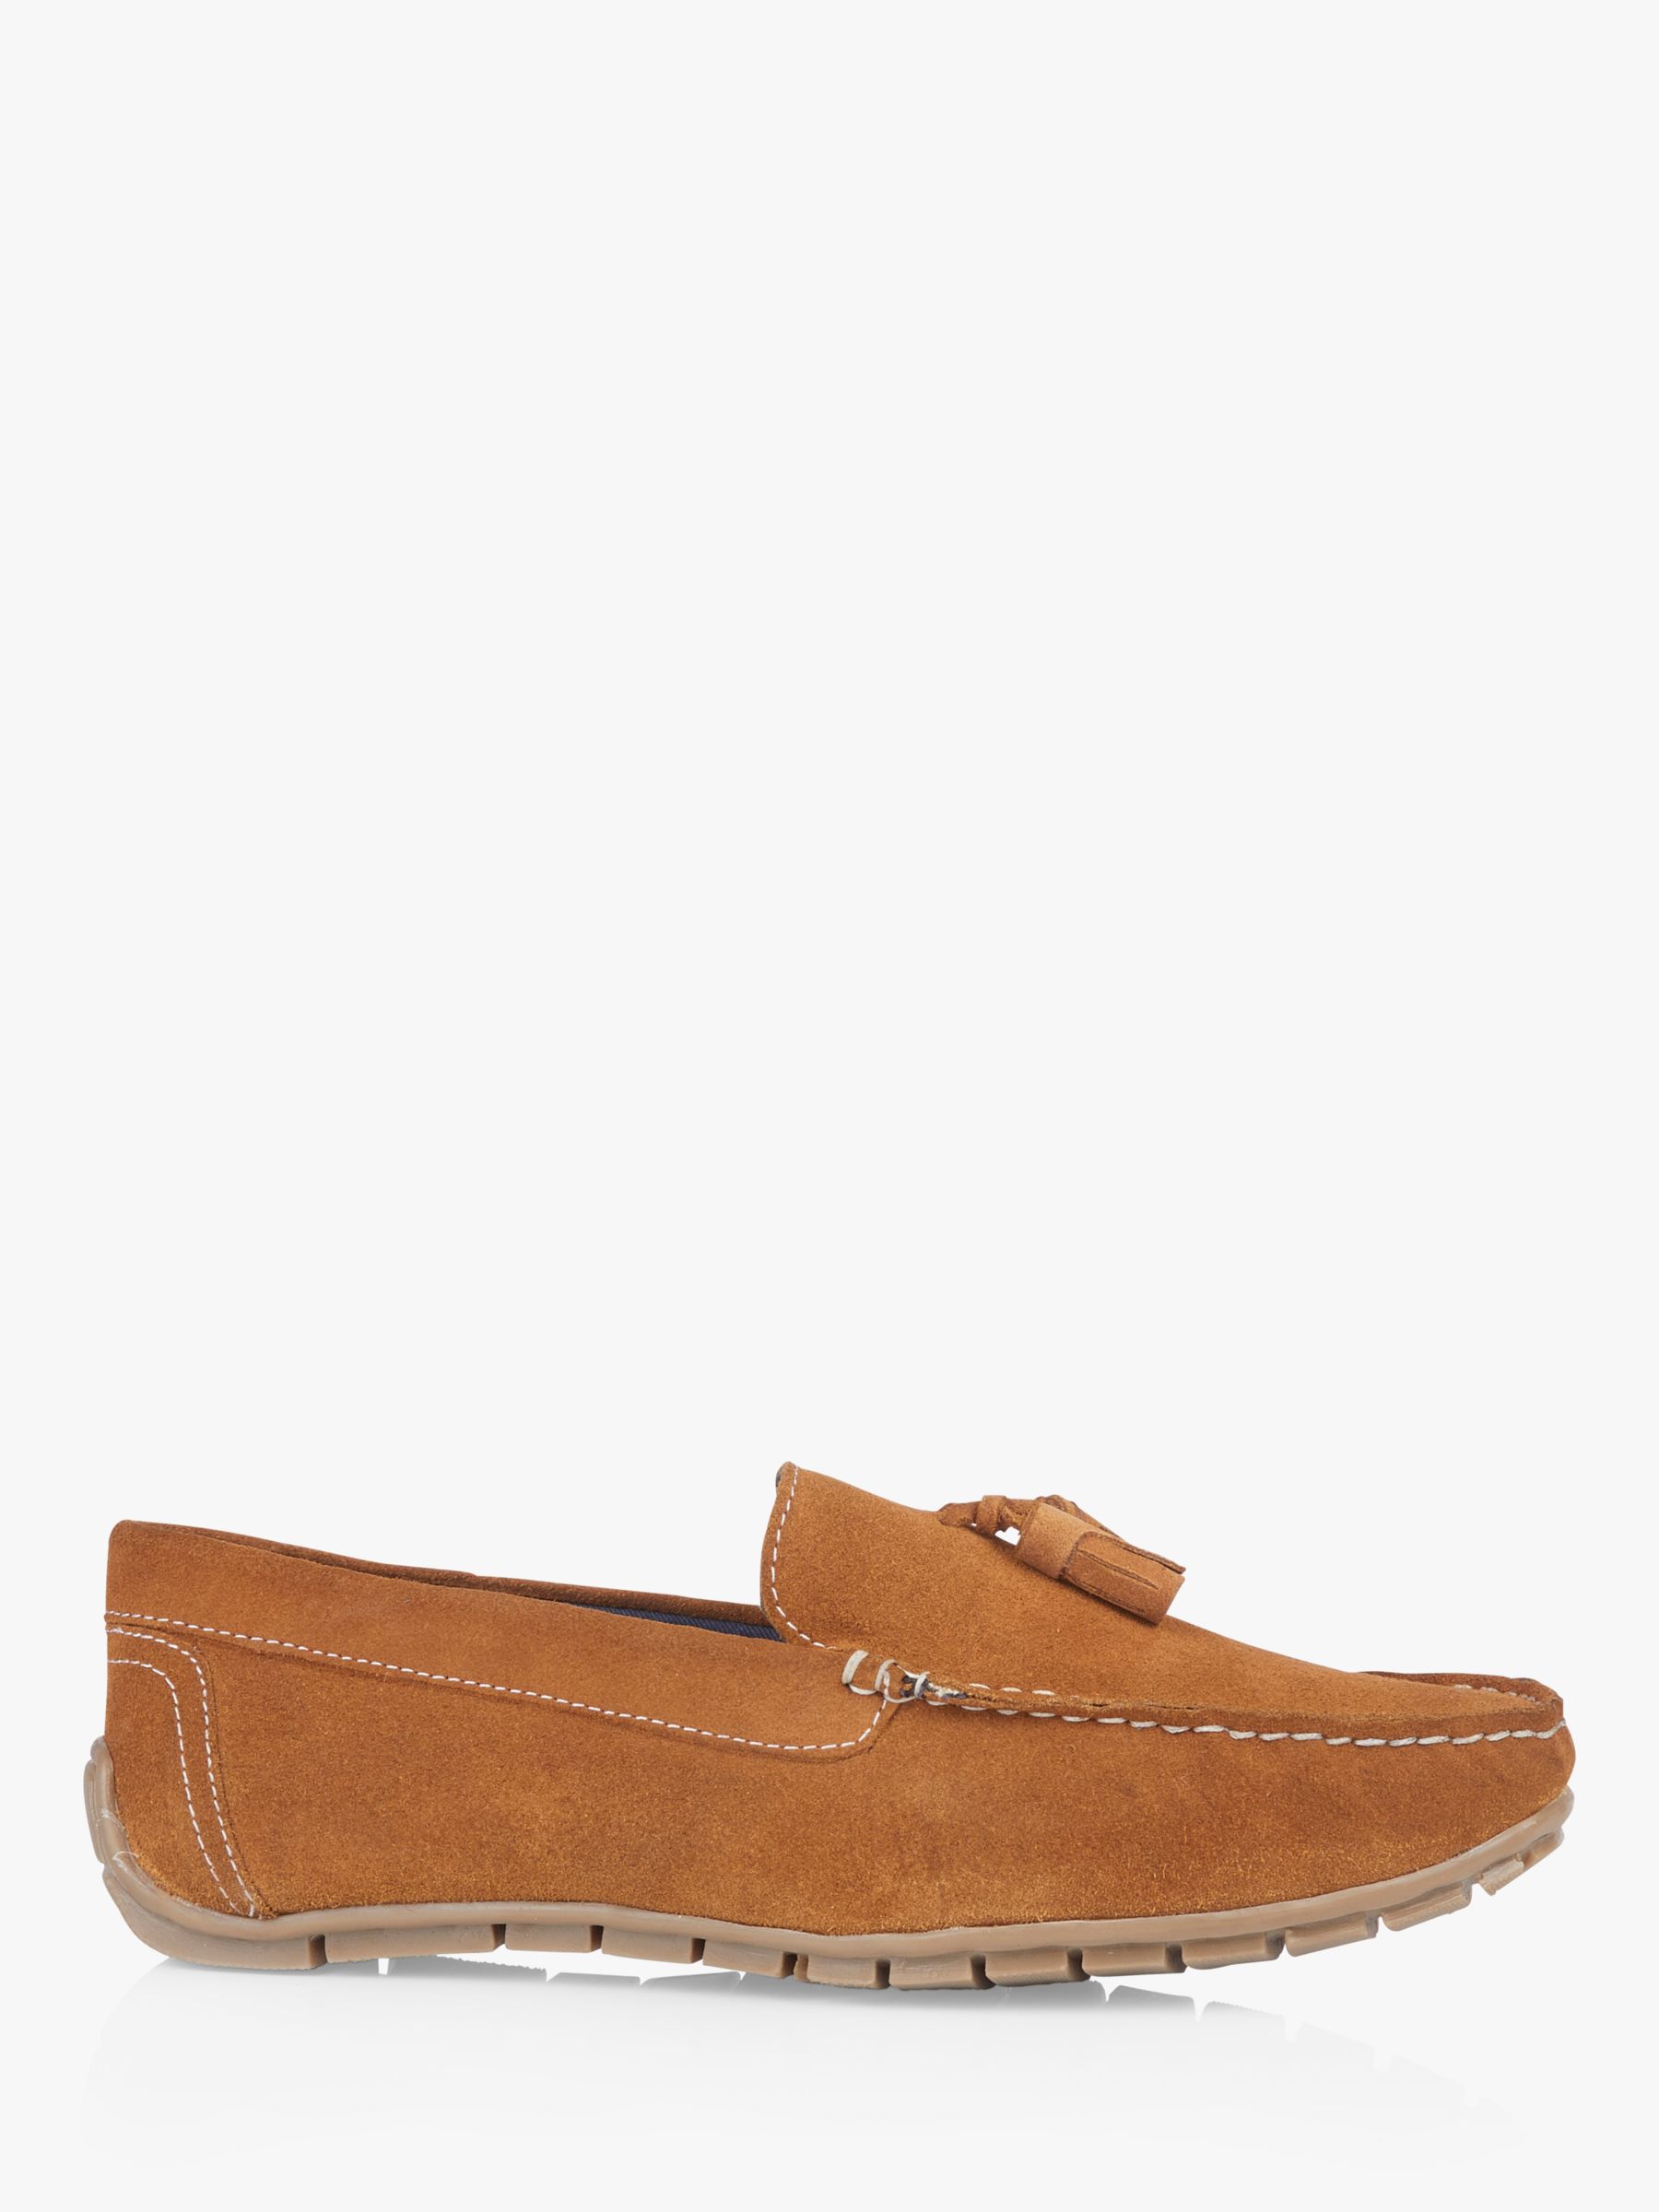 Silver Street London Monza Suede Loafers, Tan at John Lewis & Partners